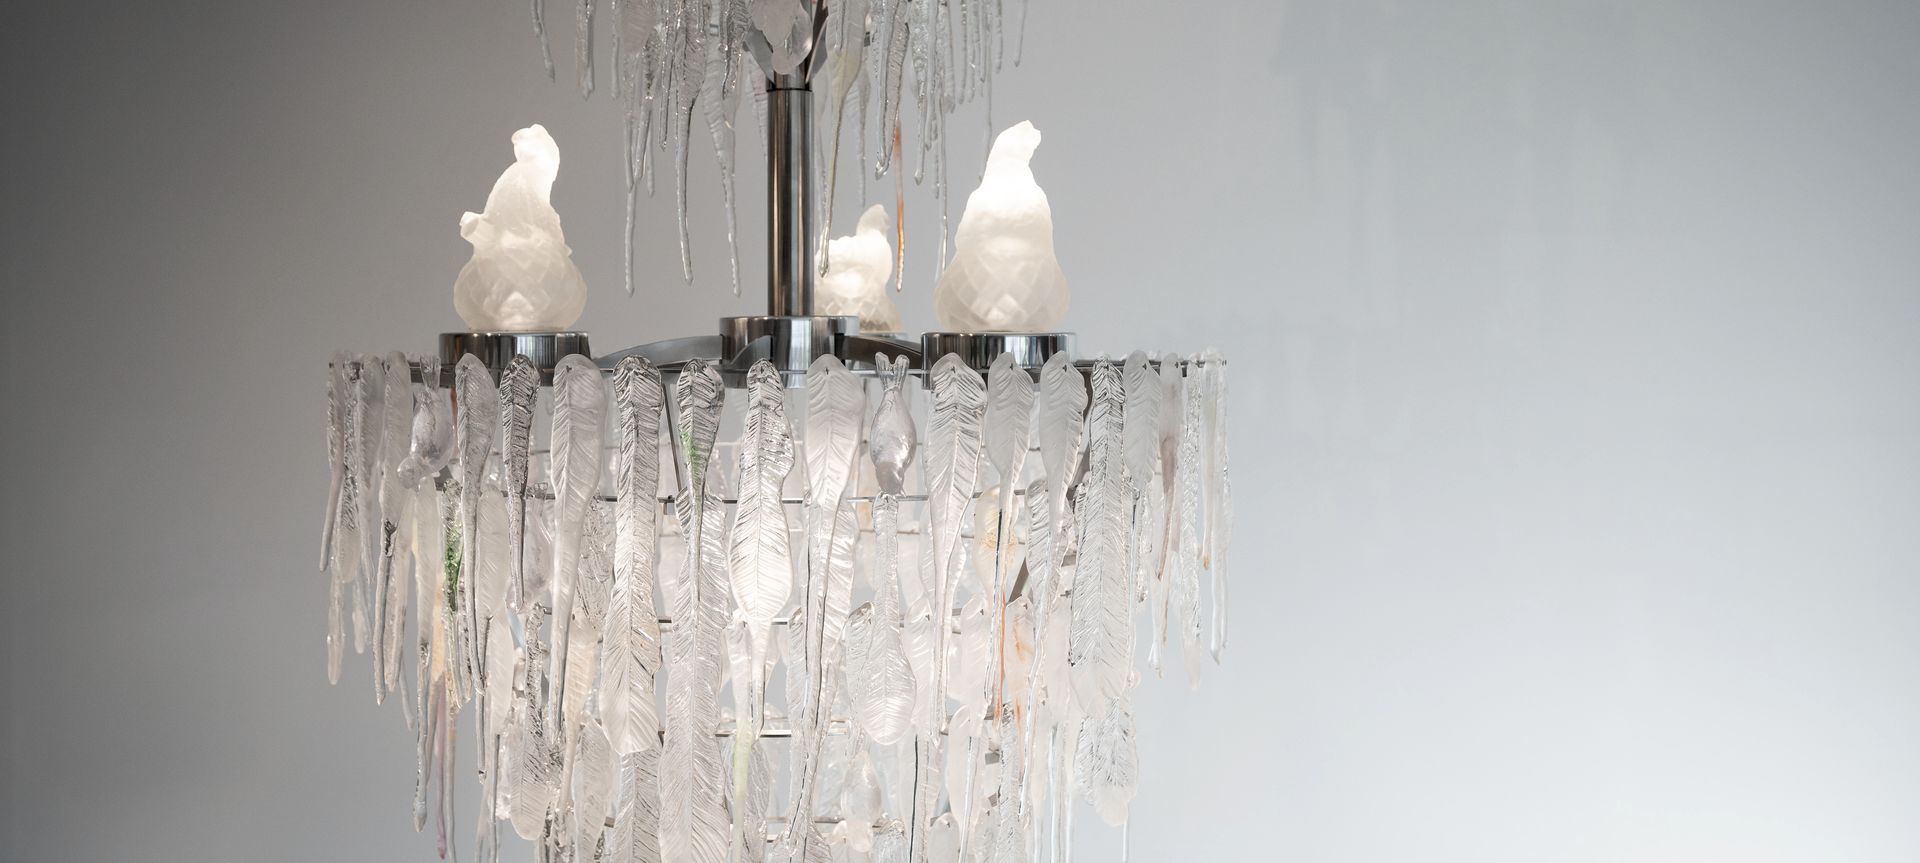 The Ghost Chandelier commission for the Dowse Art Museum banner